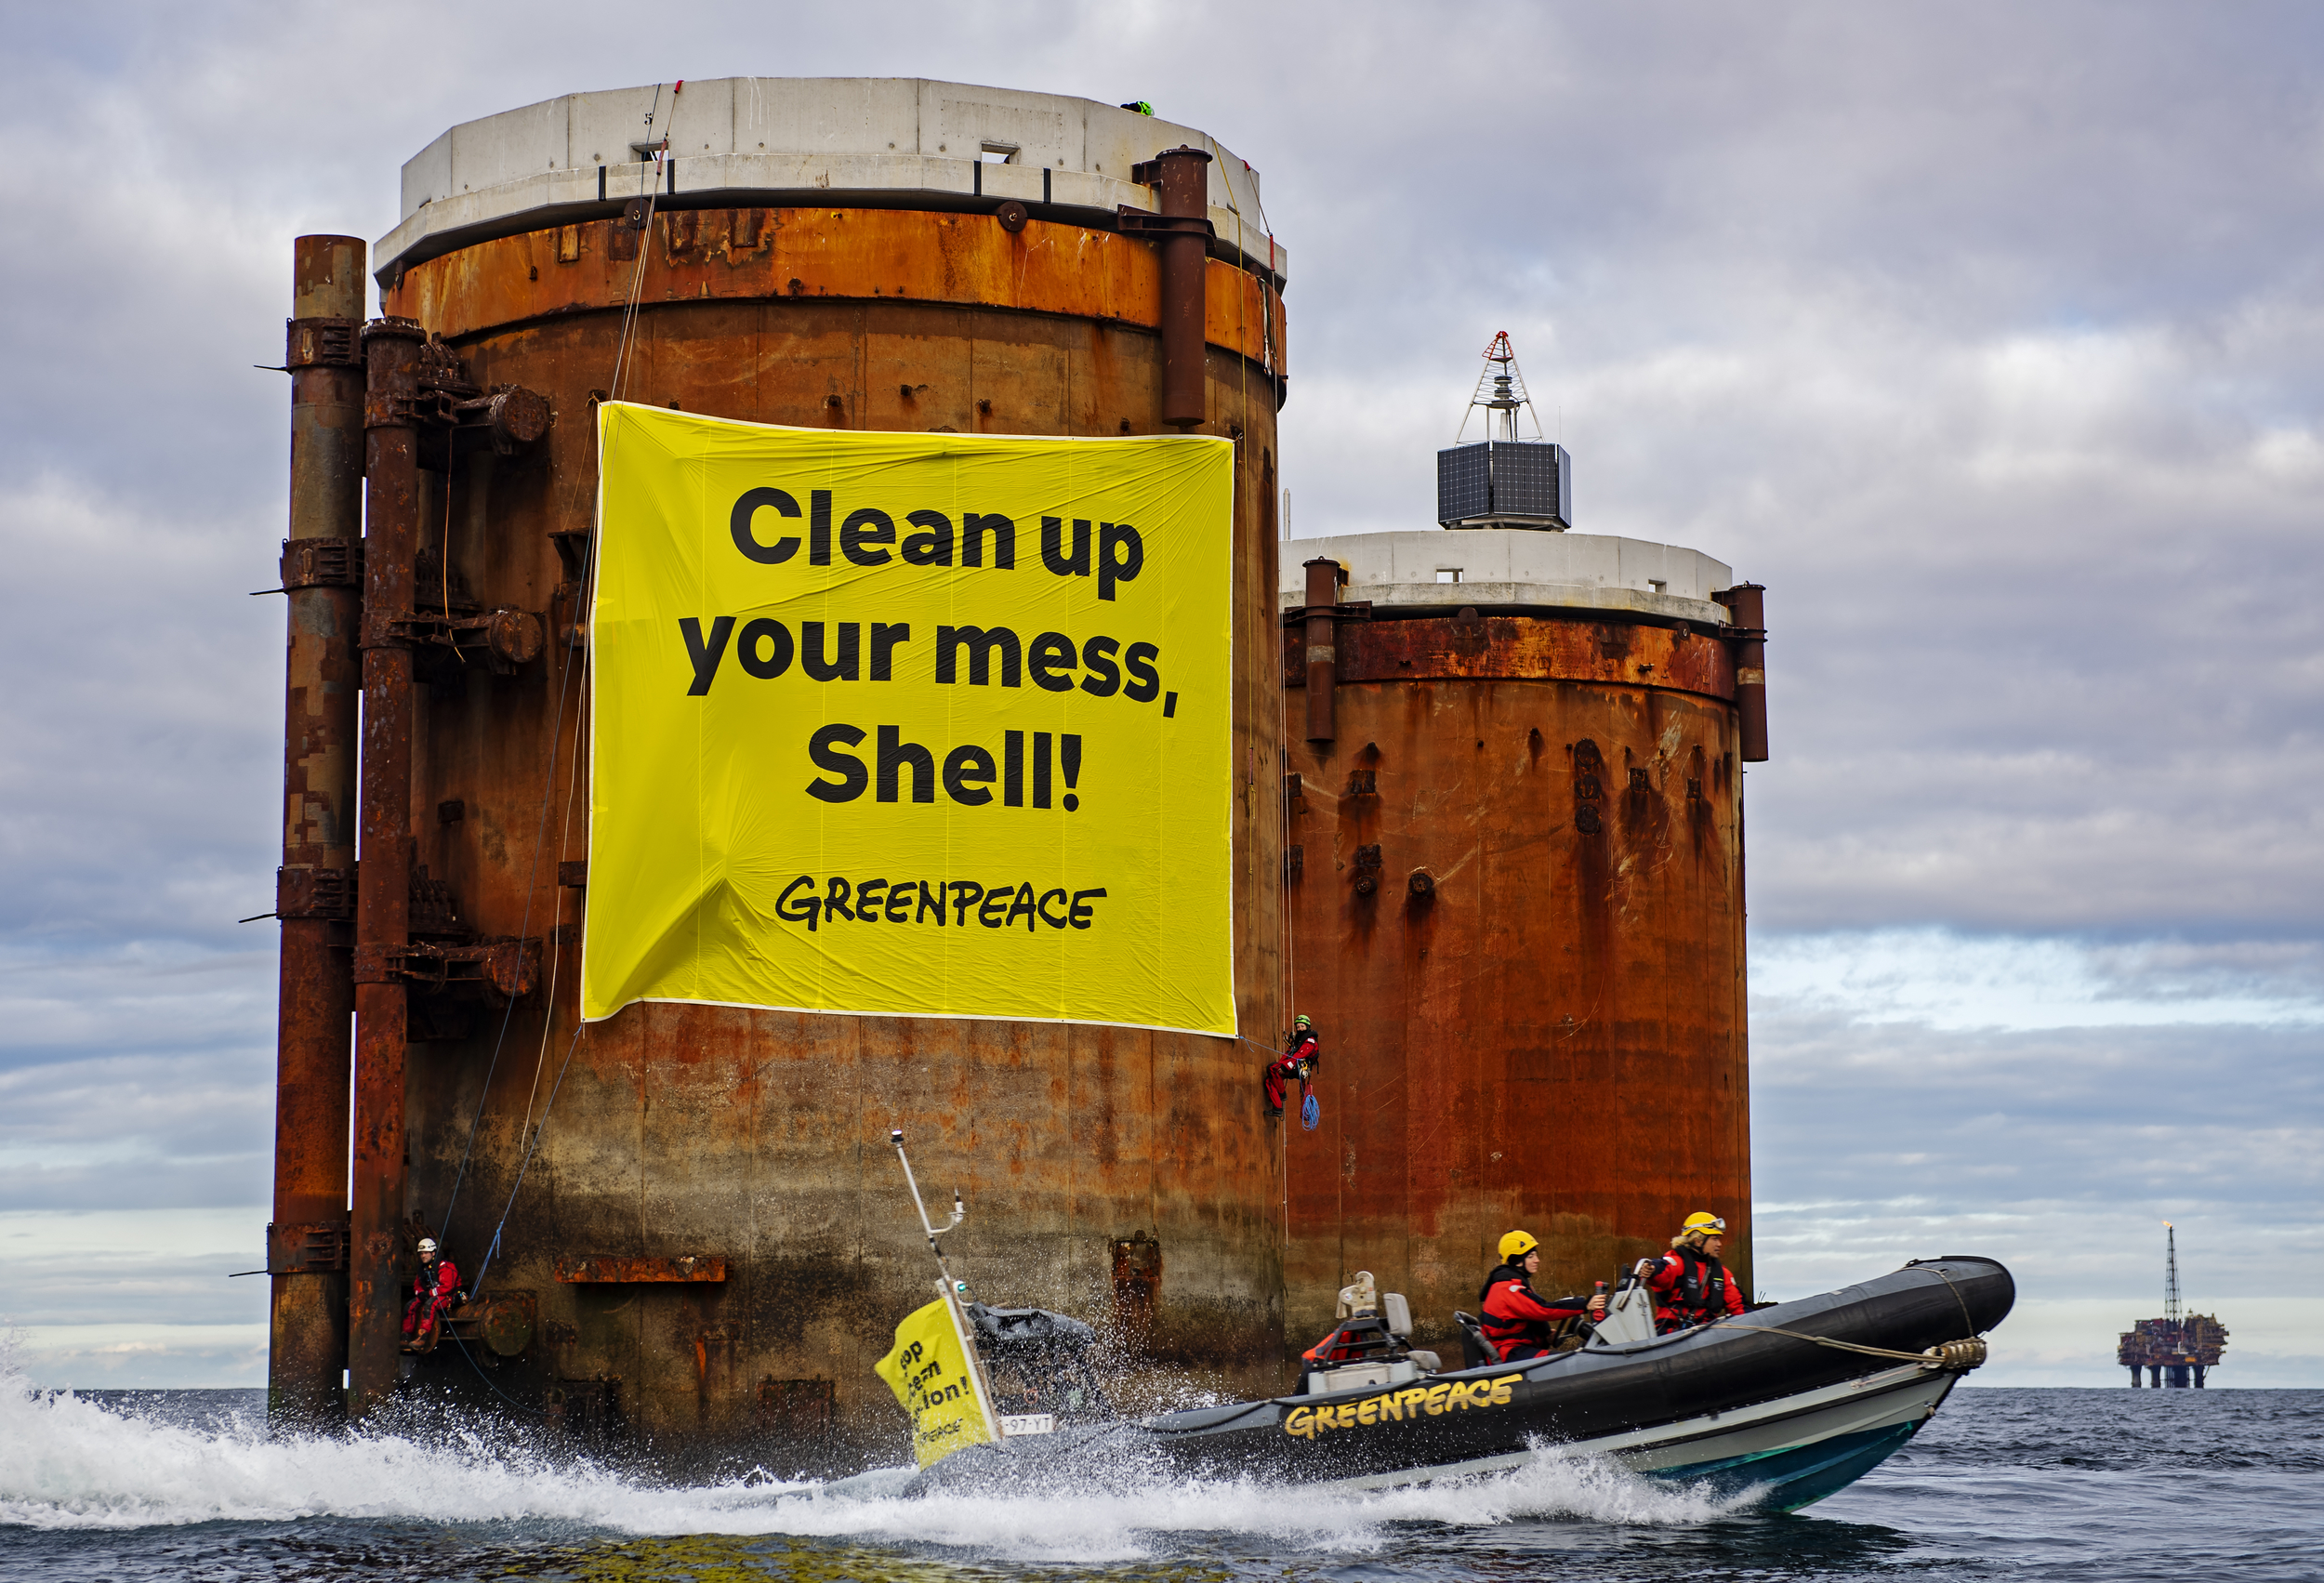 Greenpeace activists from the Netherlands, Germany and Denmark boarded two oil platforms in Shell’s Brent field in a peaceful protest against plans by the company to leave parts of old oil structures with 11,000 tons of oil in the North Sea. 
Climbers, supported by the Greenpeace ship Rainbow Warrior, scaled Brent Alpha and Bravo and hung banners saying, ‘Shell, clean up your mess!’ and ‘Stop Ocean Pollution’.